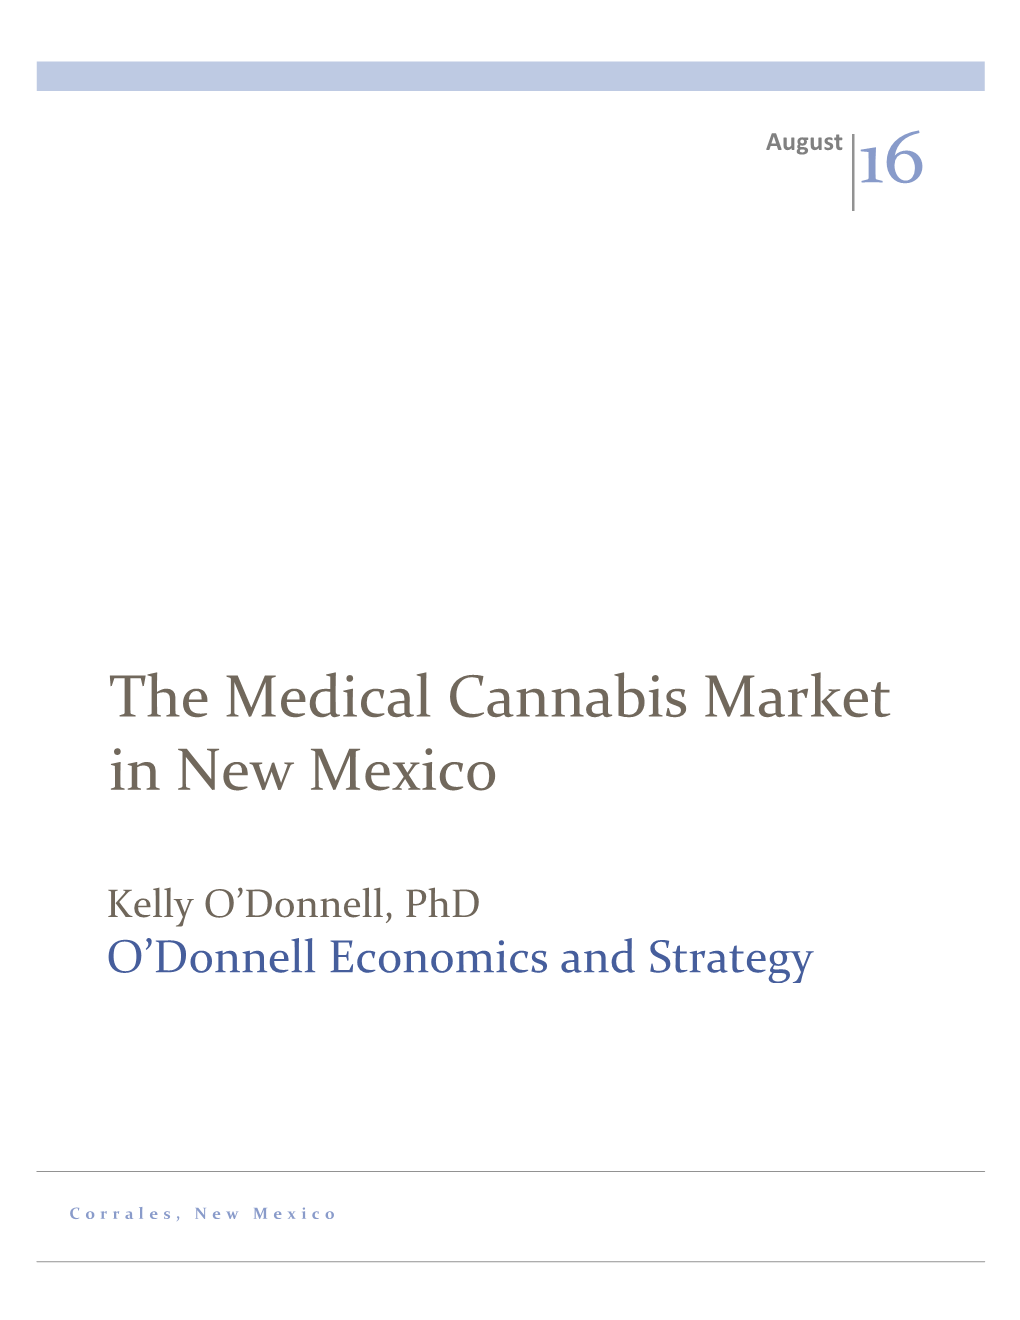 The Medical Cannabis Market in New Mexico